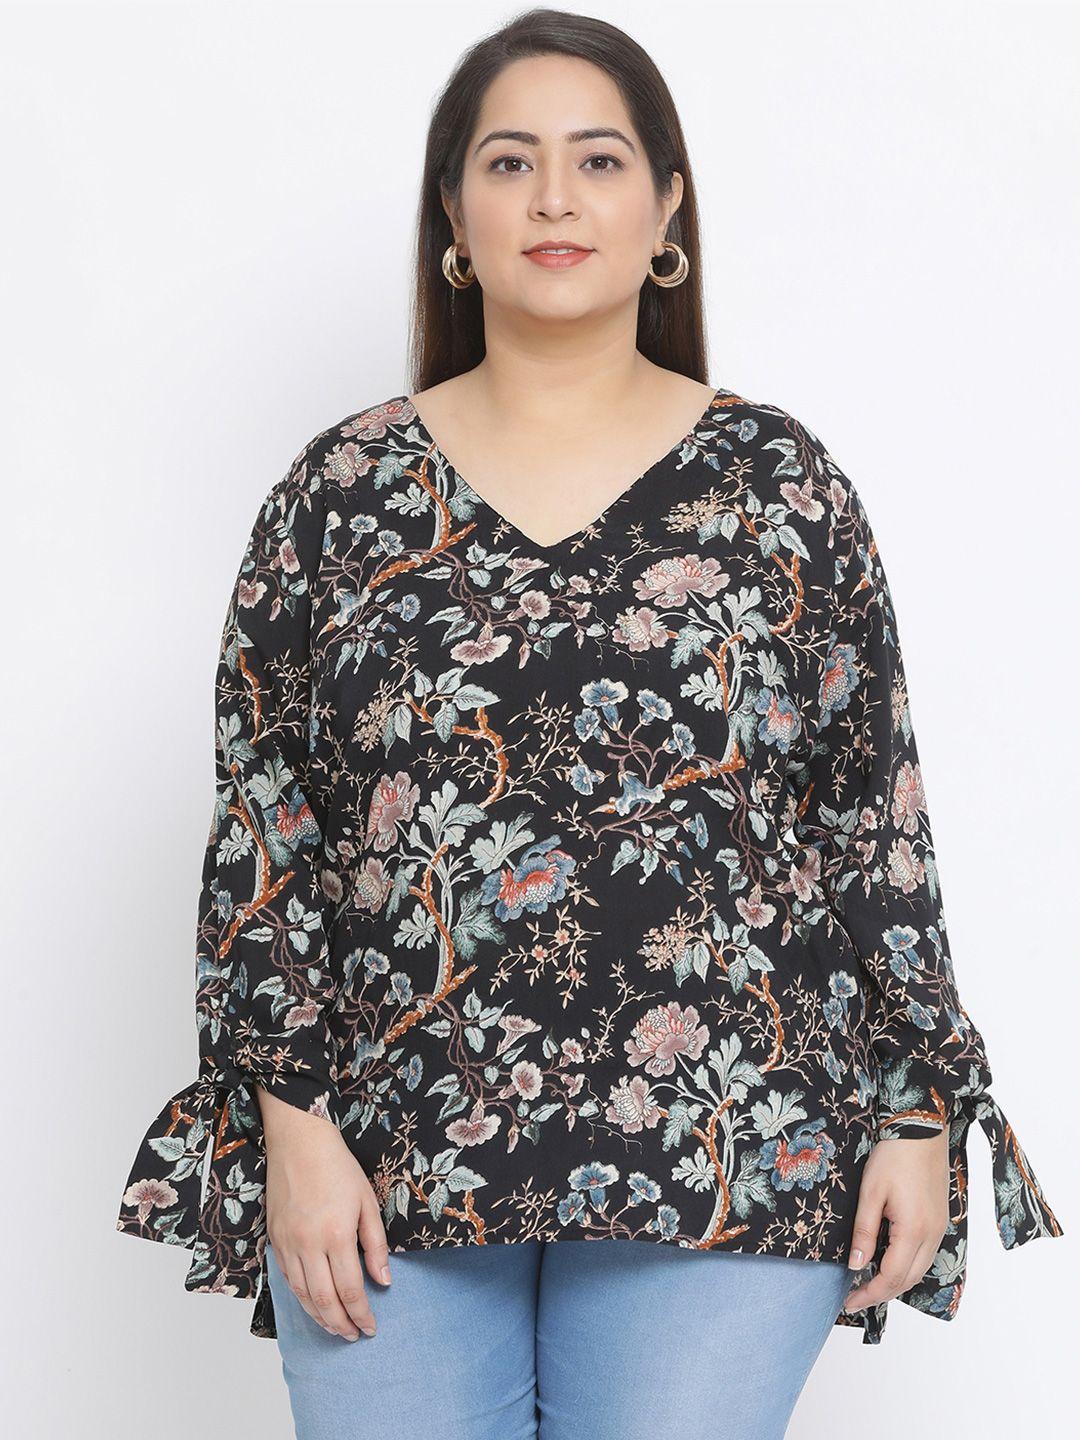 oxolloxo women black & blue floral printed top